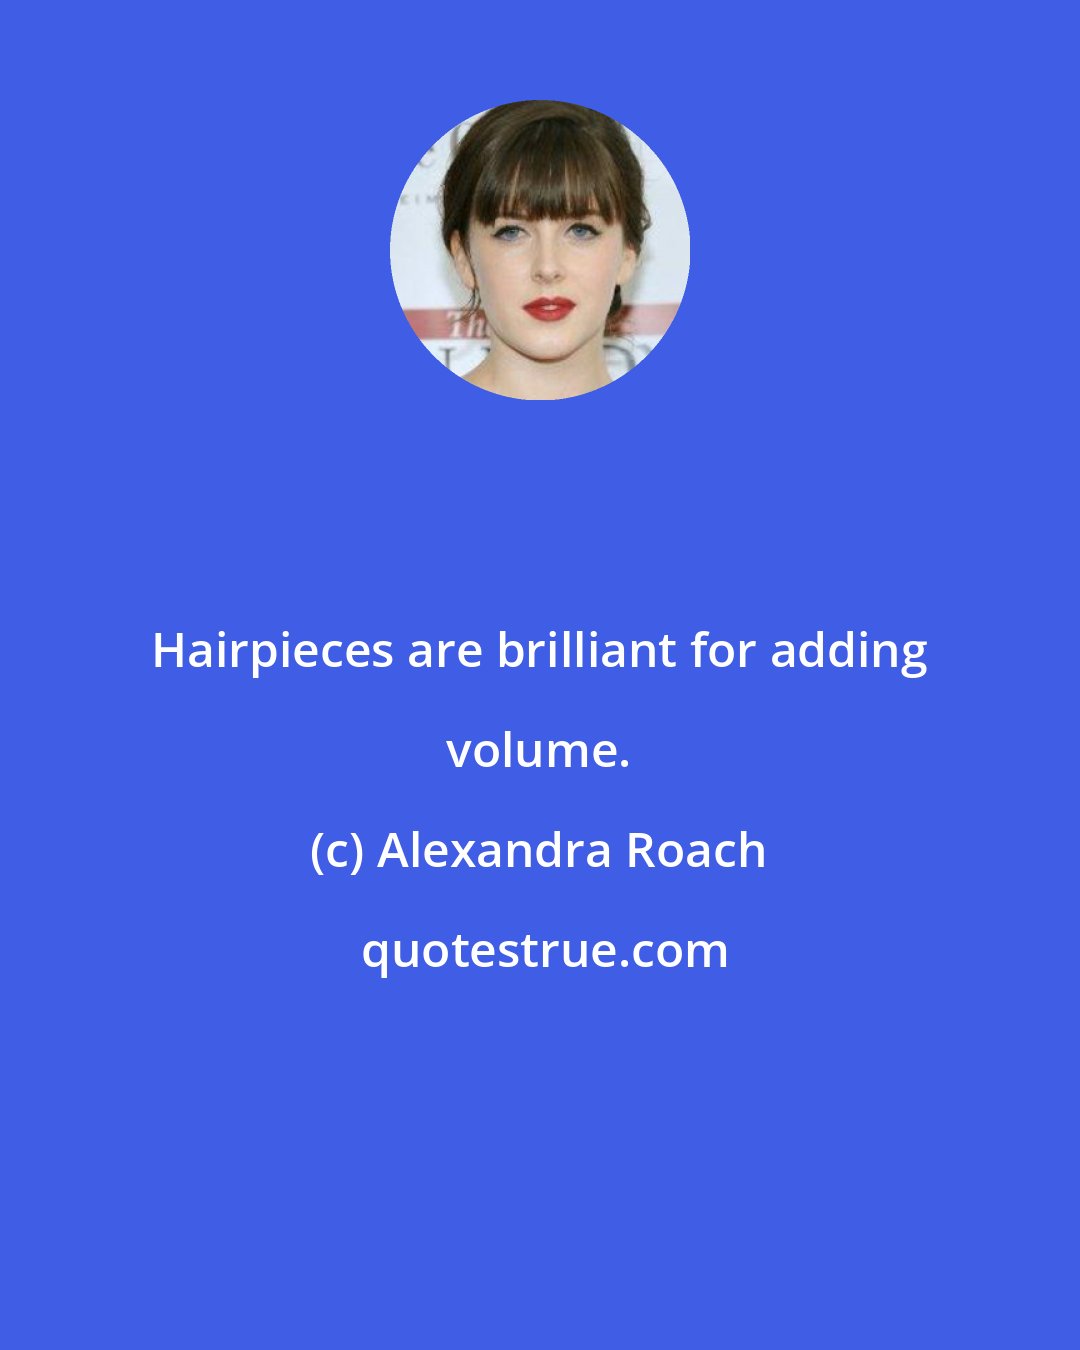 Alexandra Roach: Hairpieces are brilliant for adding volume.